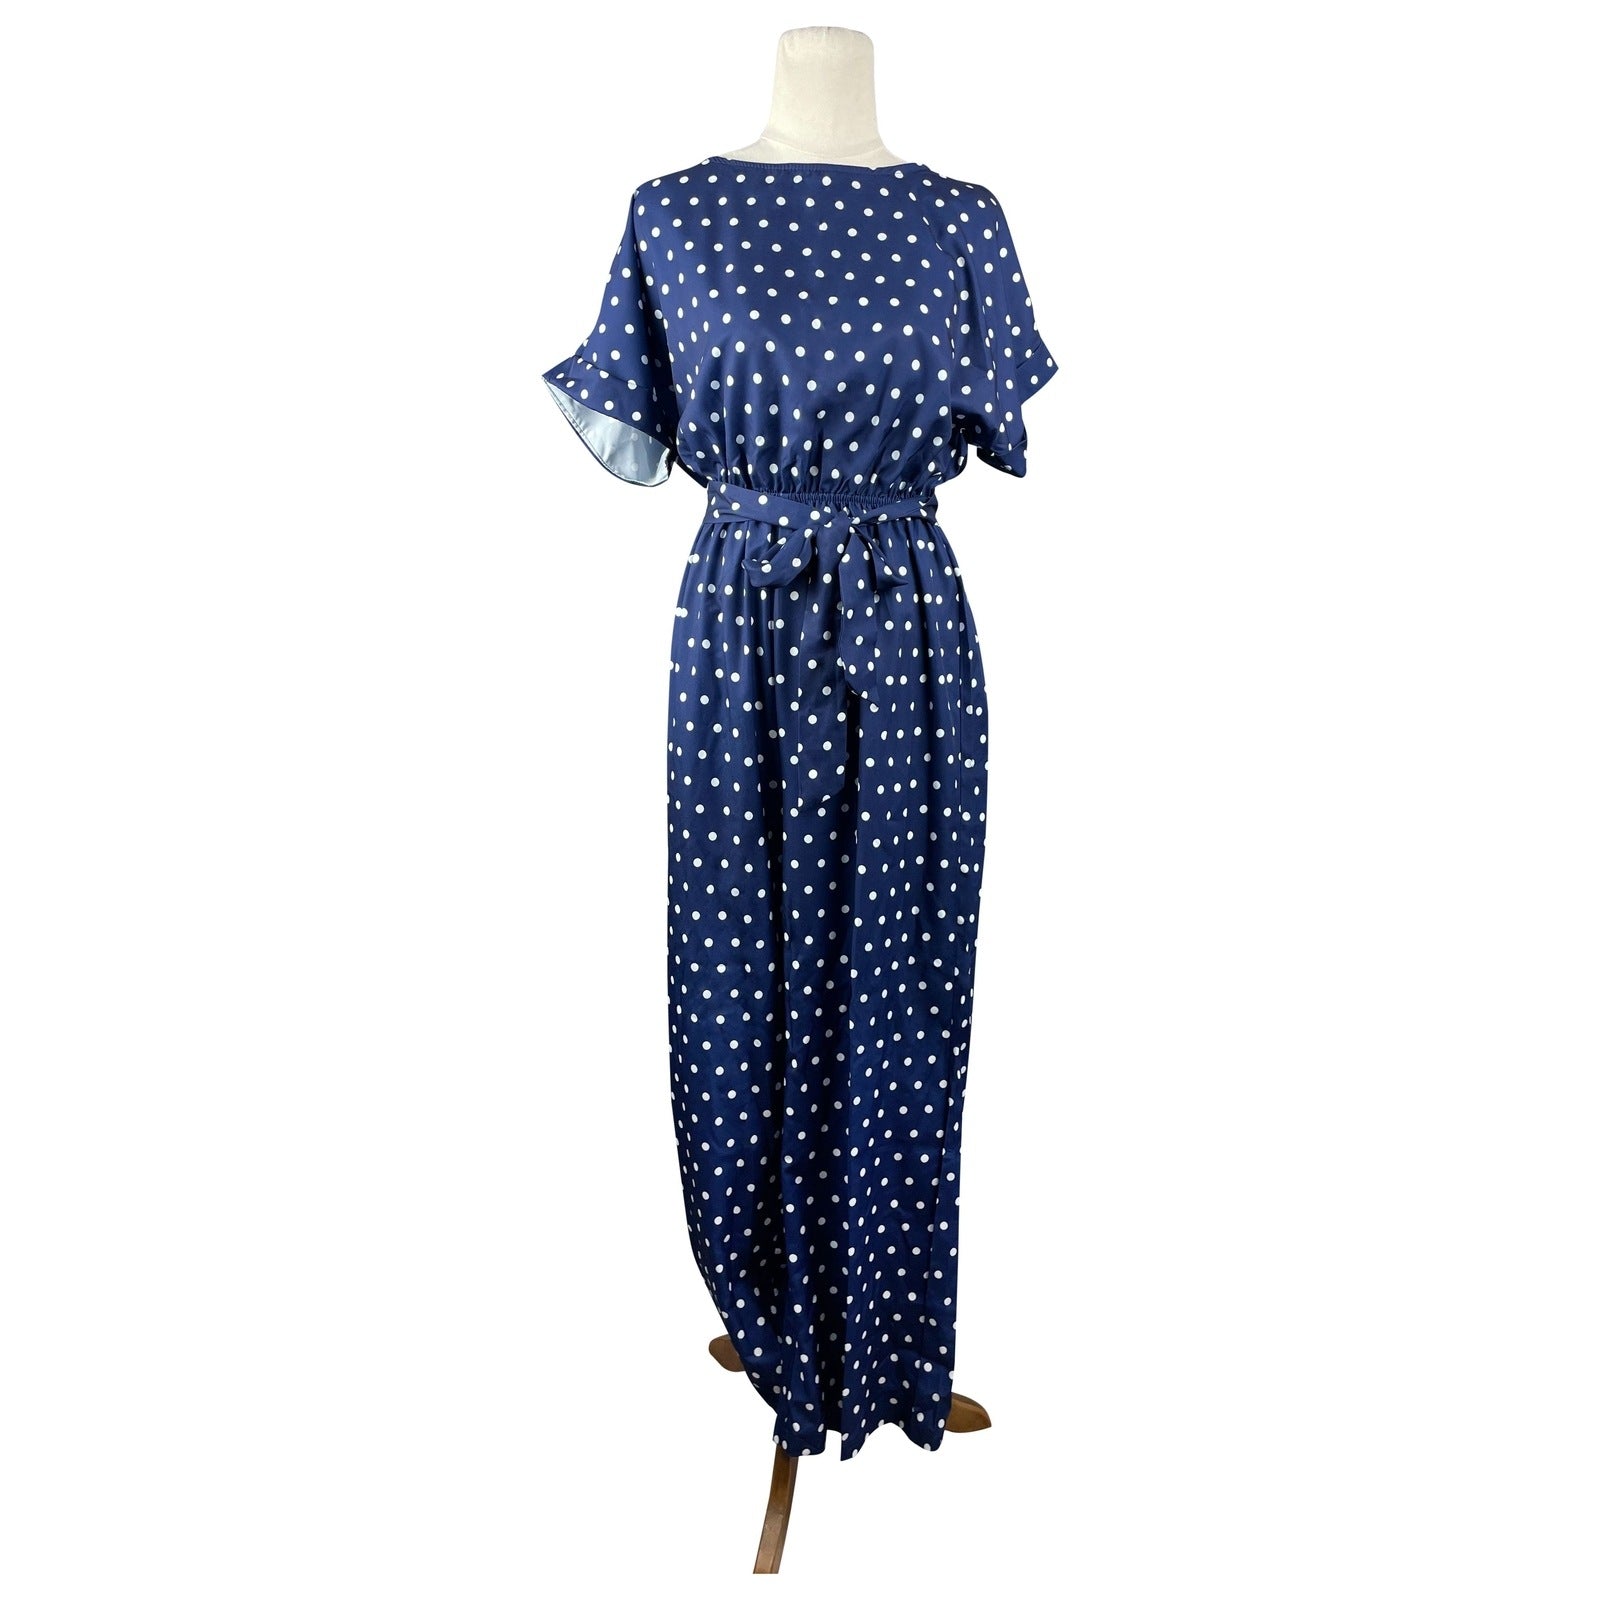 Unbranded navy jumpsuit w white polka dots | size 10-12